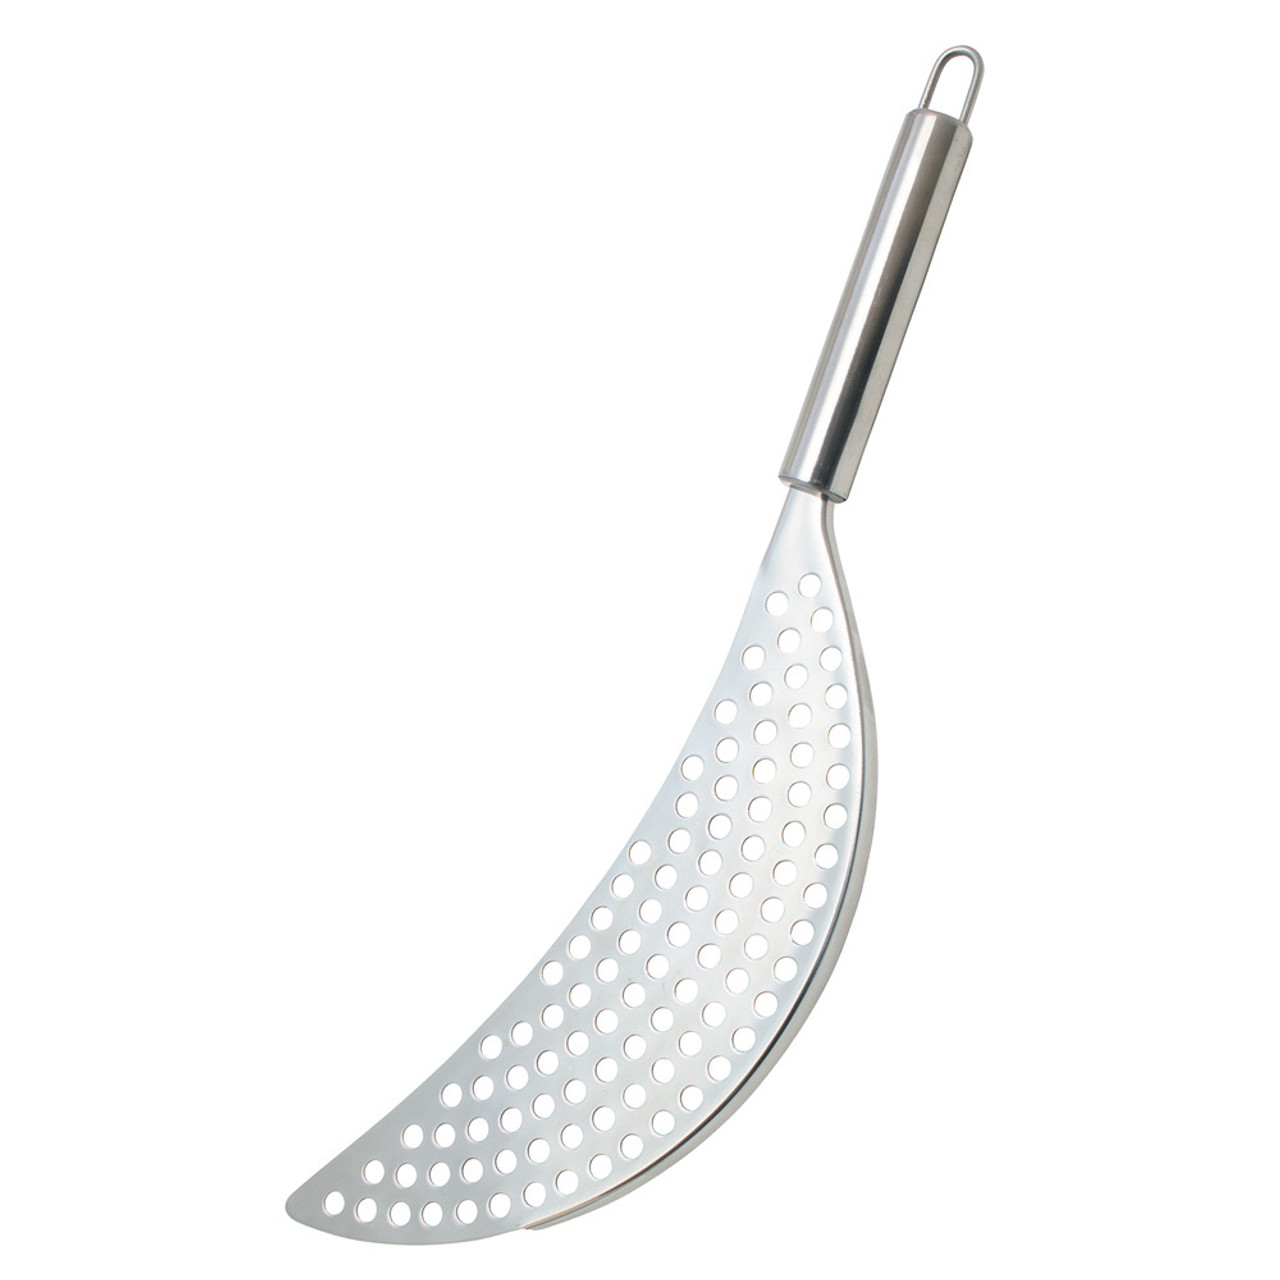 KitchenCraft Stainless Steel Crescent Shaped Pan Drainer RRP 14.99 CLEARANCE XL 7.99